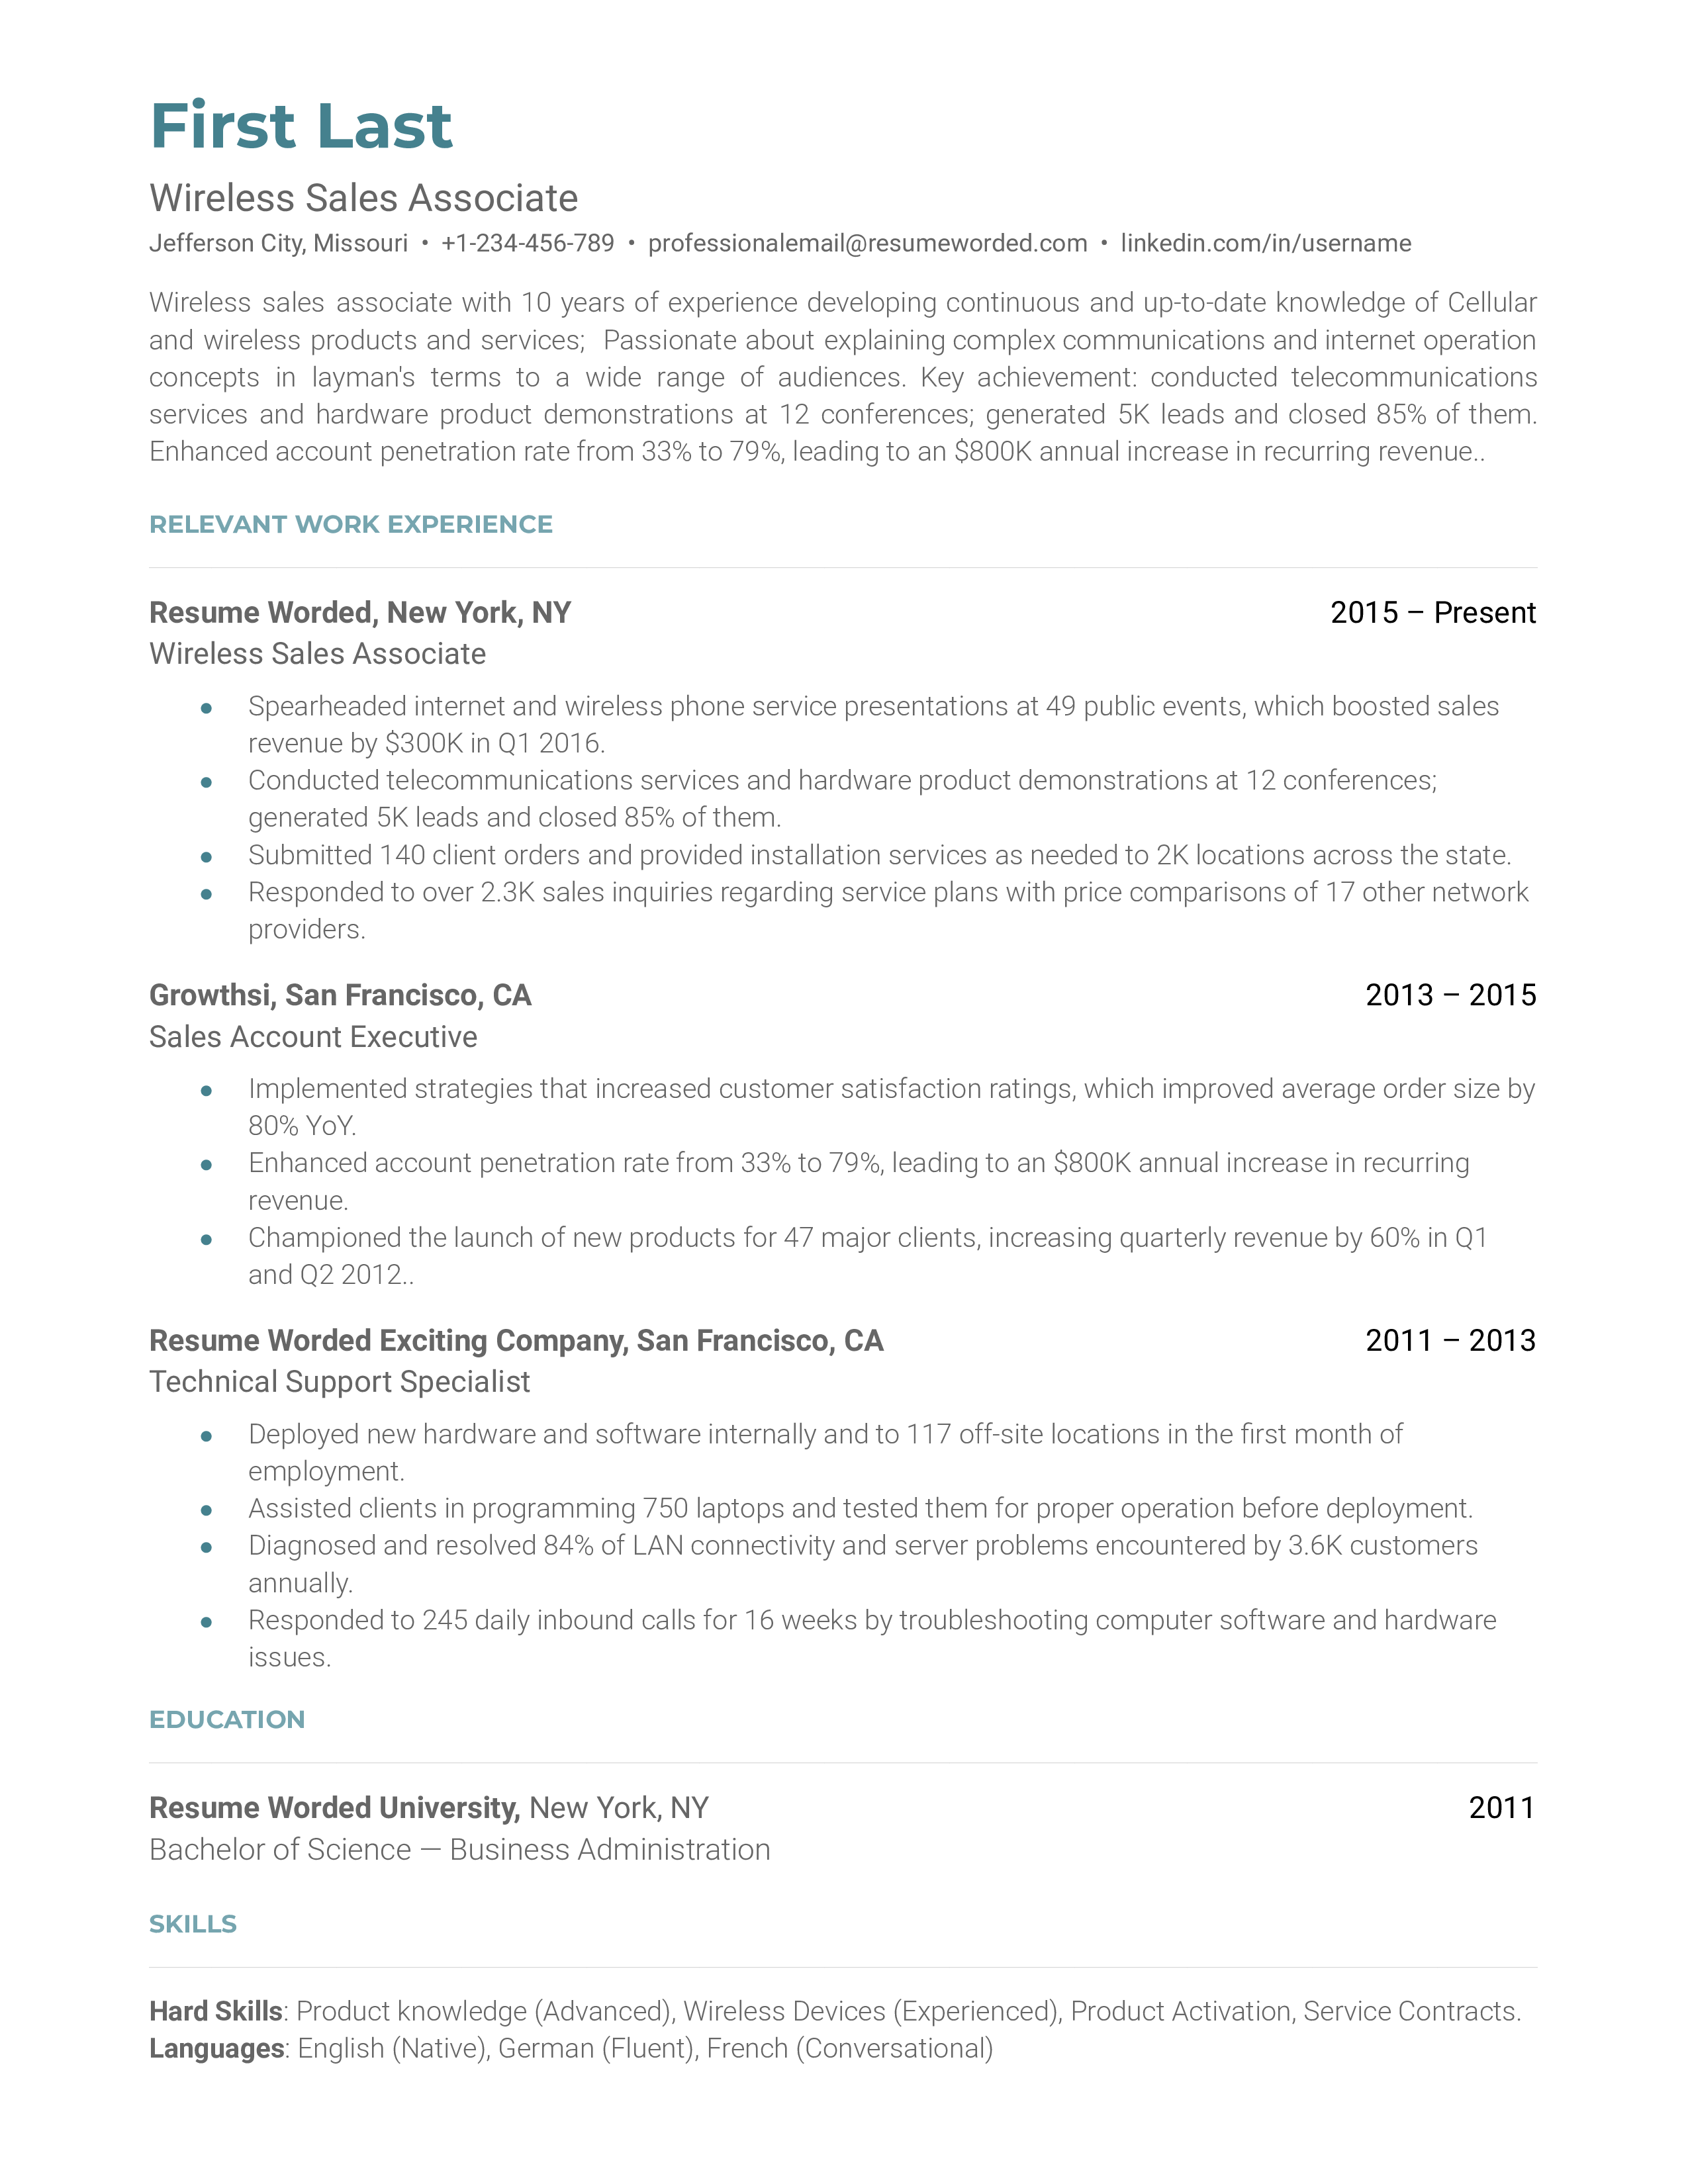 A wireless sales associate resume sample that highlights the applicant’s technical knowledge and achievements.